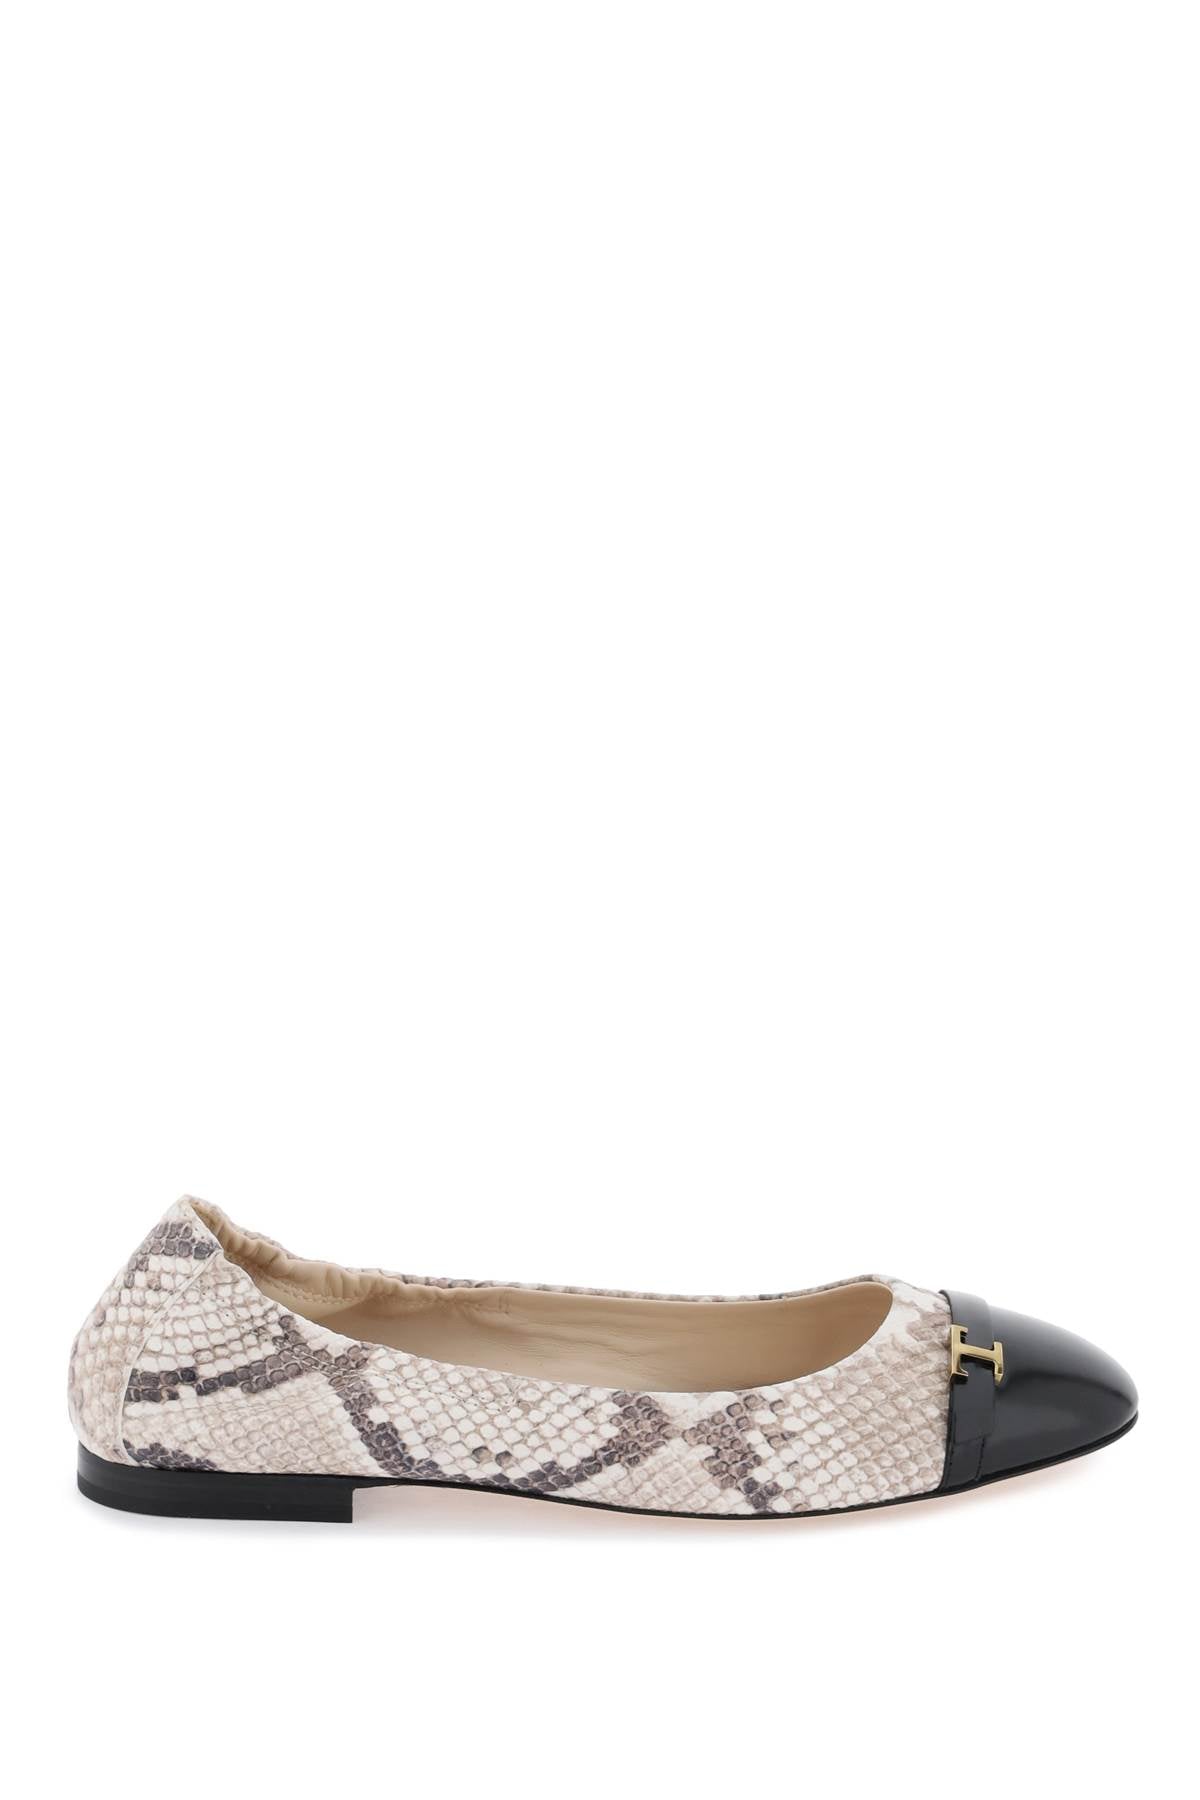 Tod's snake-printed leather ballet flats-0